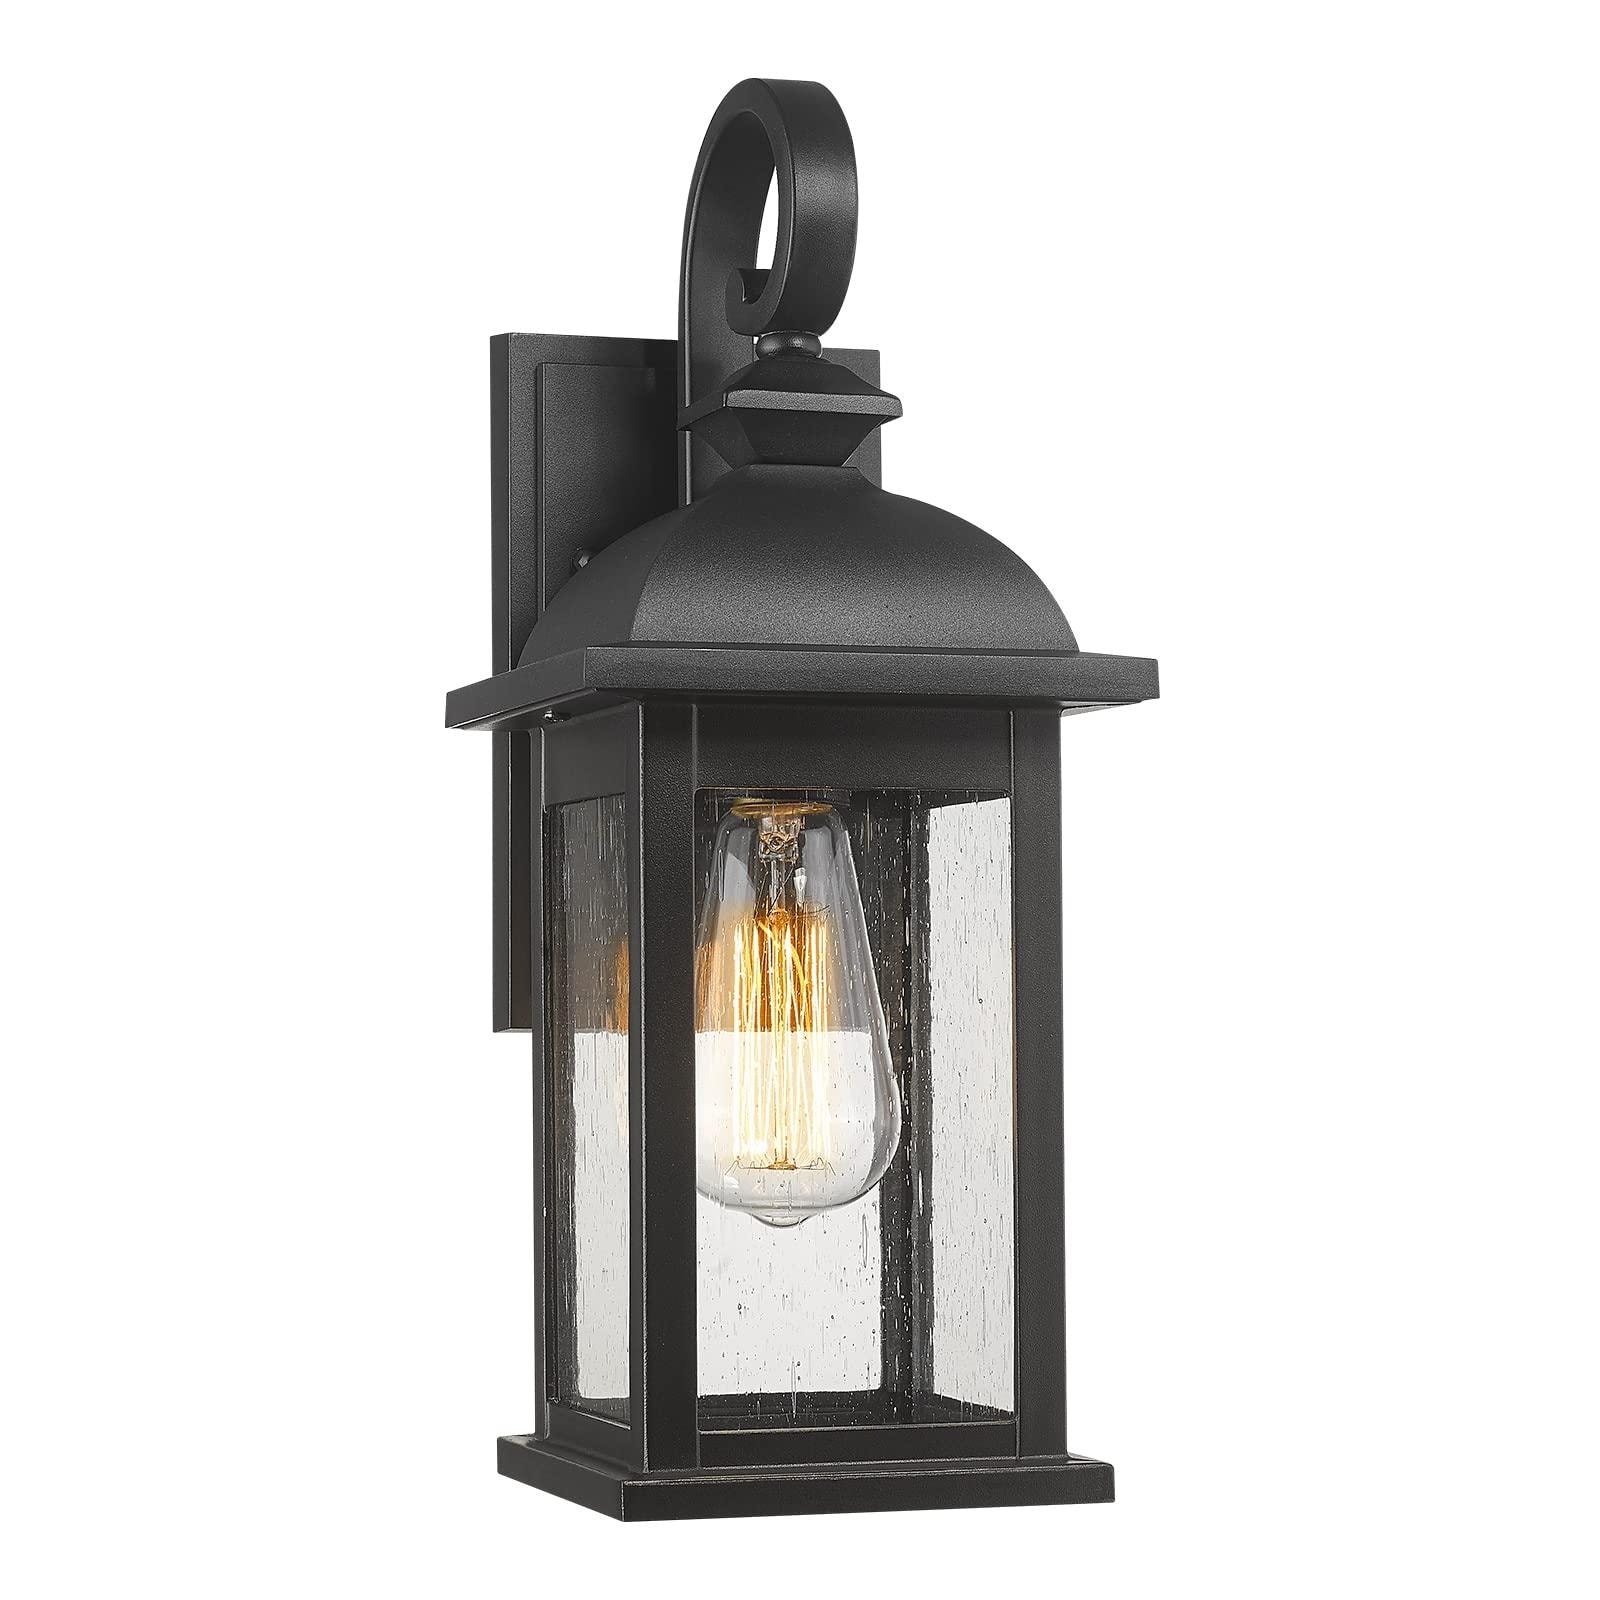 1-Light Exterior Waterproof Wall Sconce,E26 Socket Front Porch Lights,Anti-Rust  Matte Black Finish with Seeded Glass Lampshade On Sale Bed Bath   Beyond 36936914